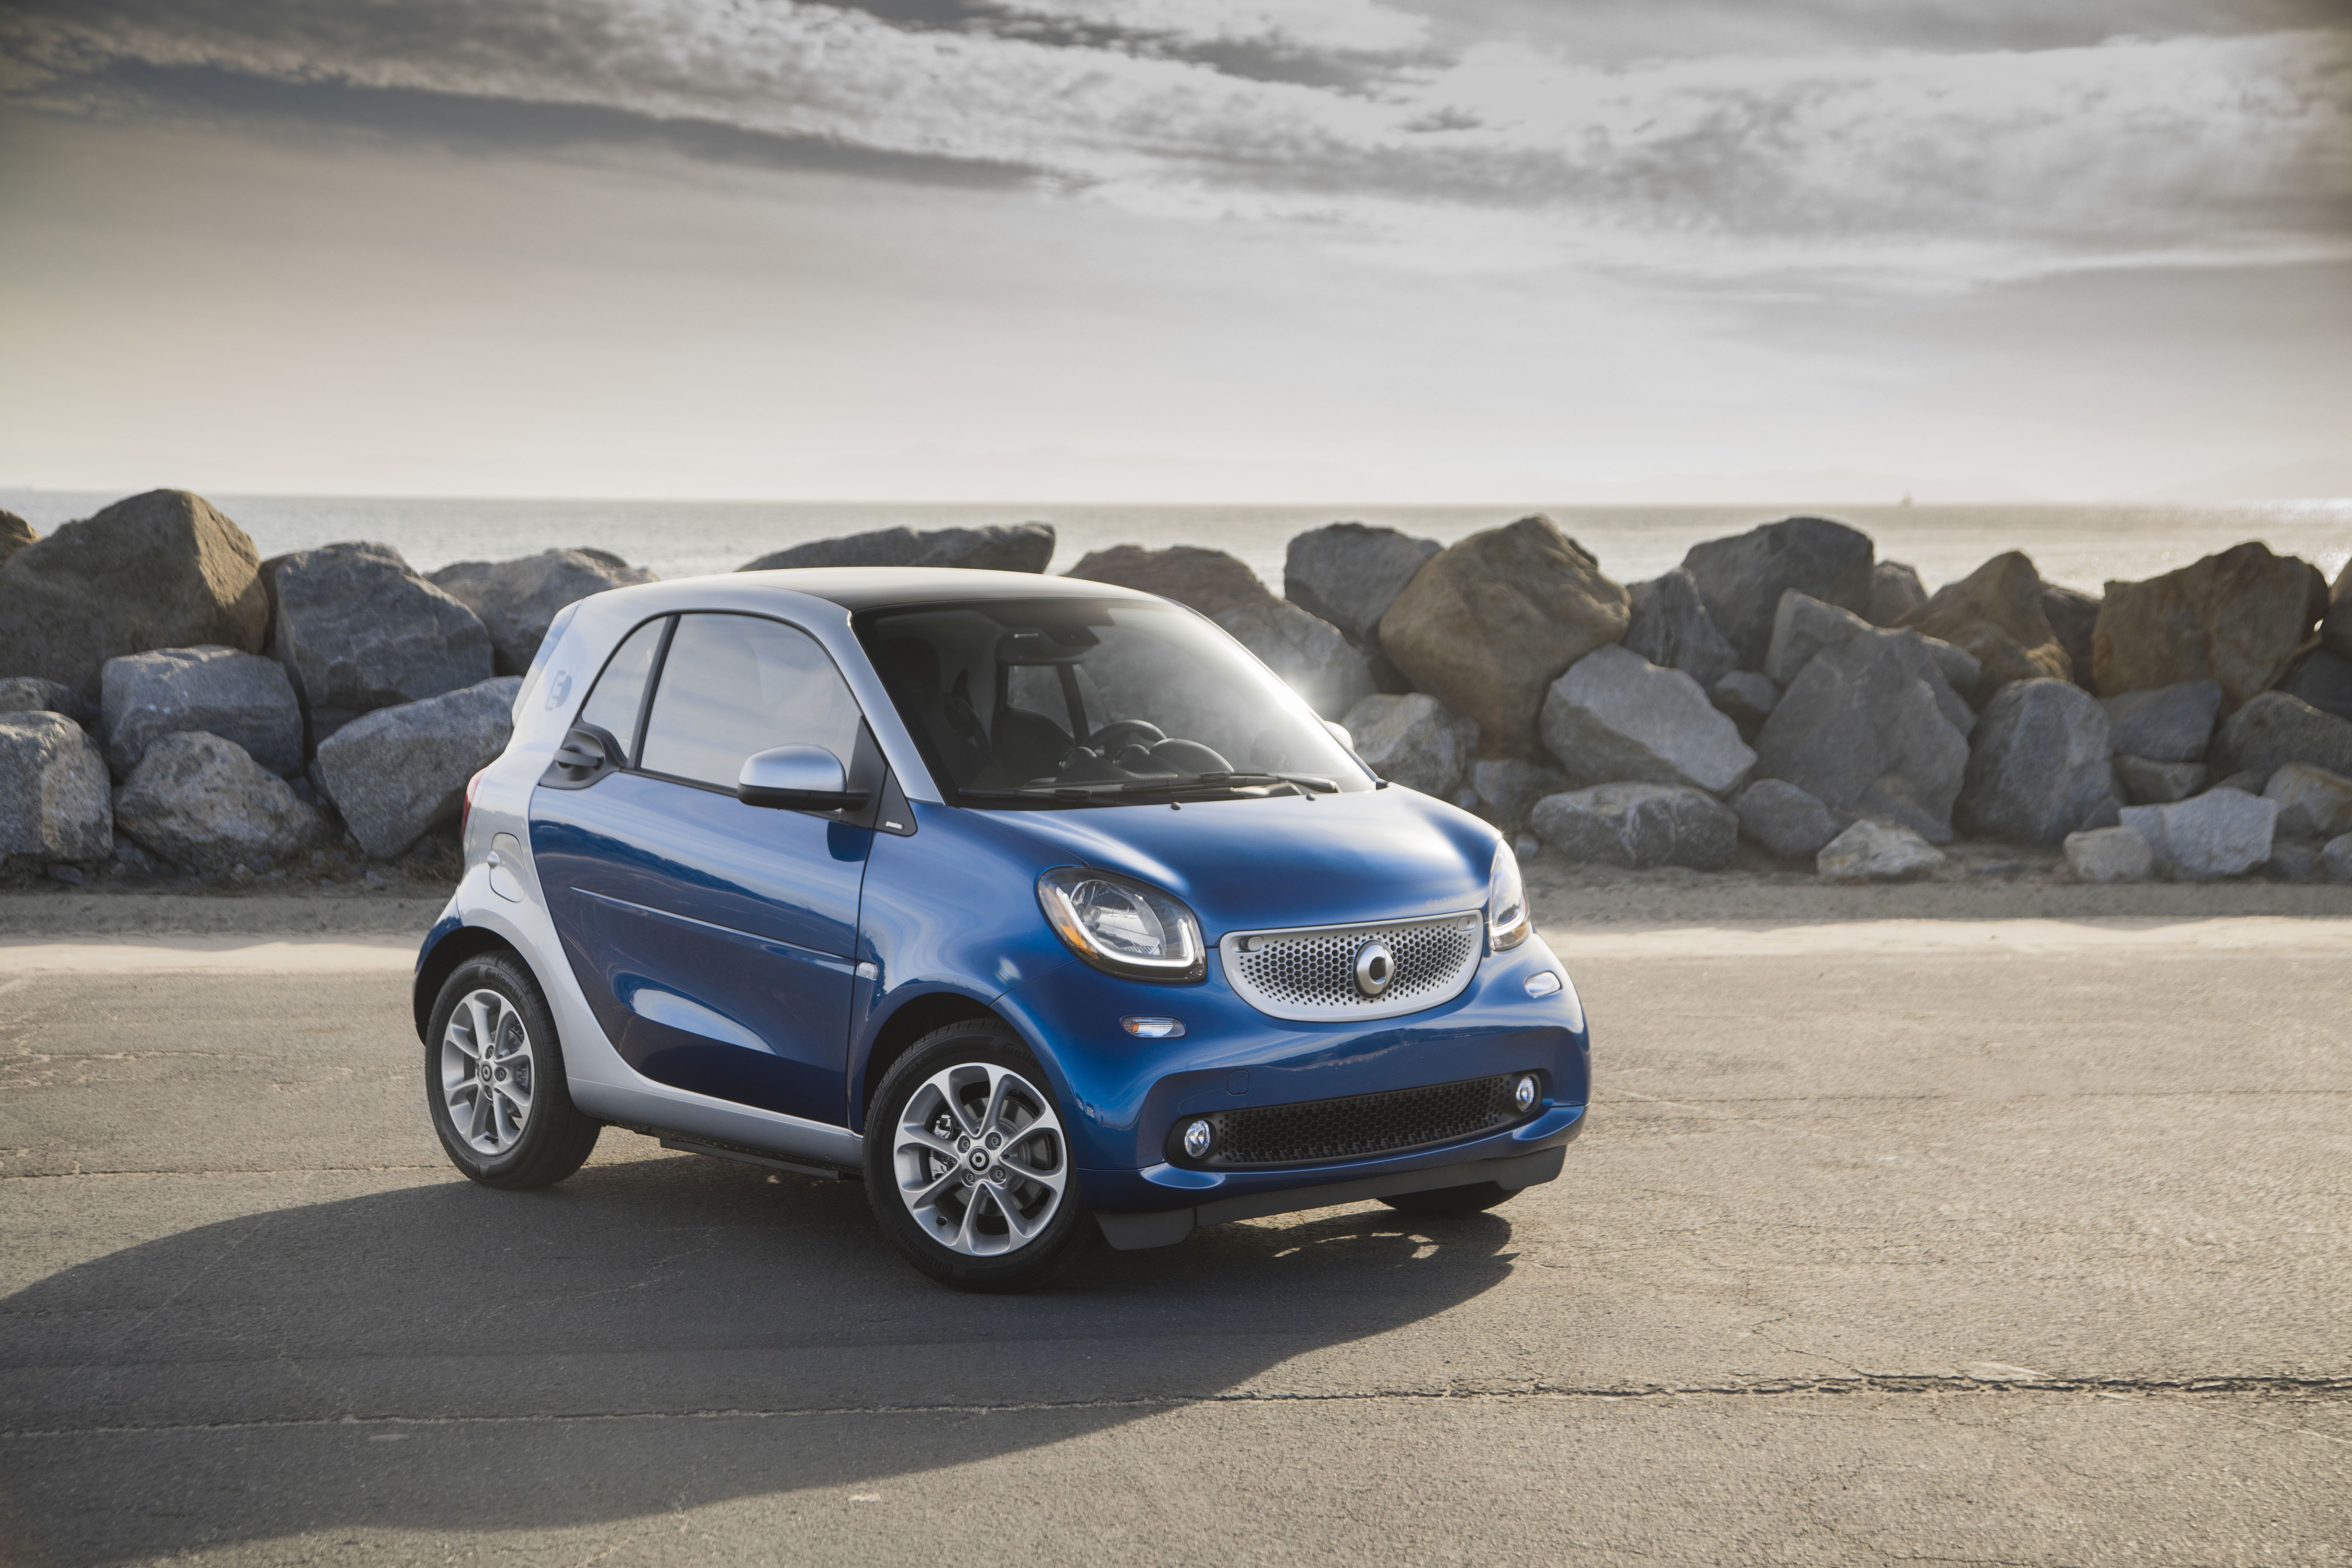 Smart Car Brand Discontinued for the U.S. Market by Mercedes